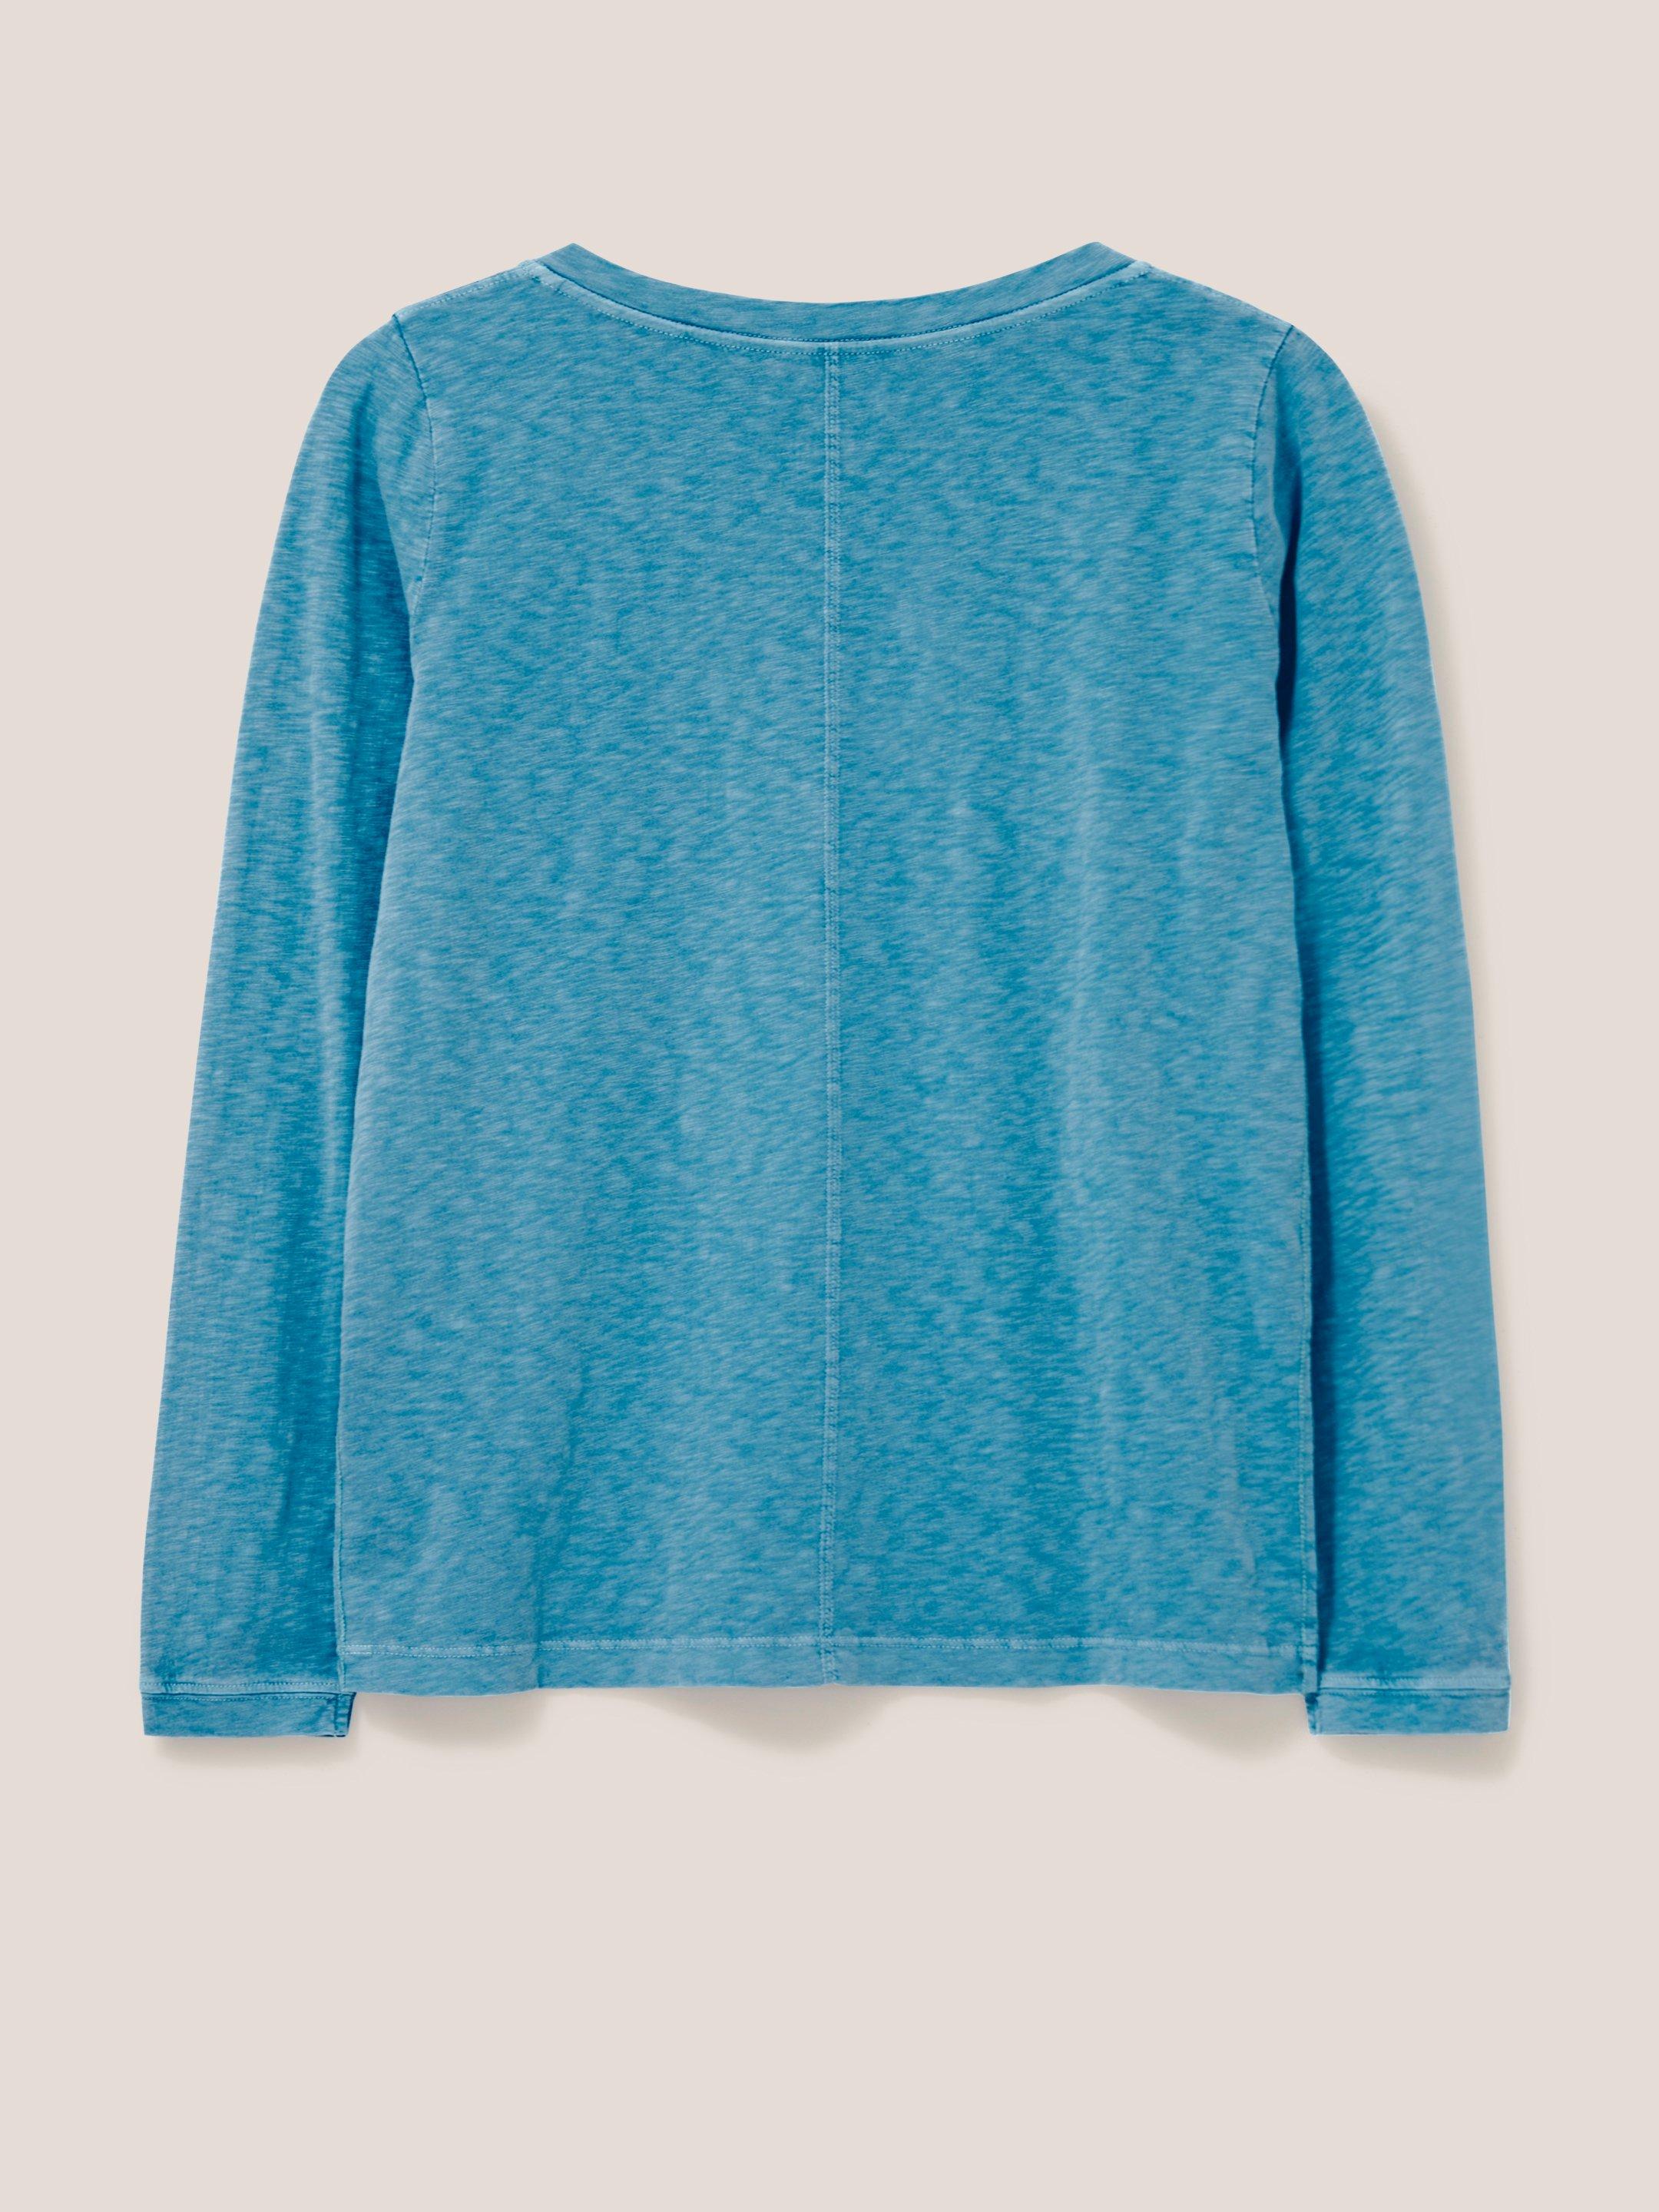 Nelly LS Tee in MID BLUE - FLAT BACK